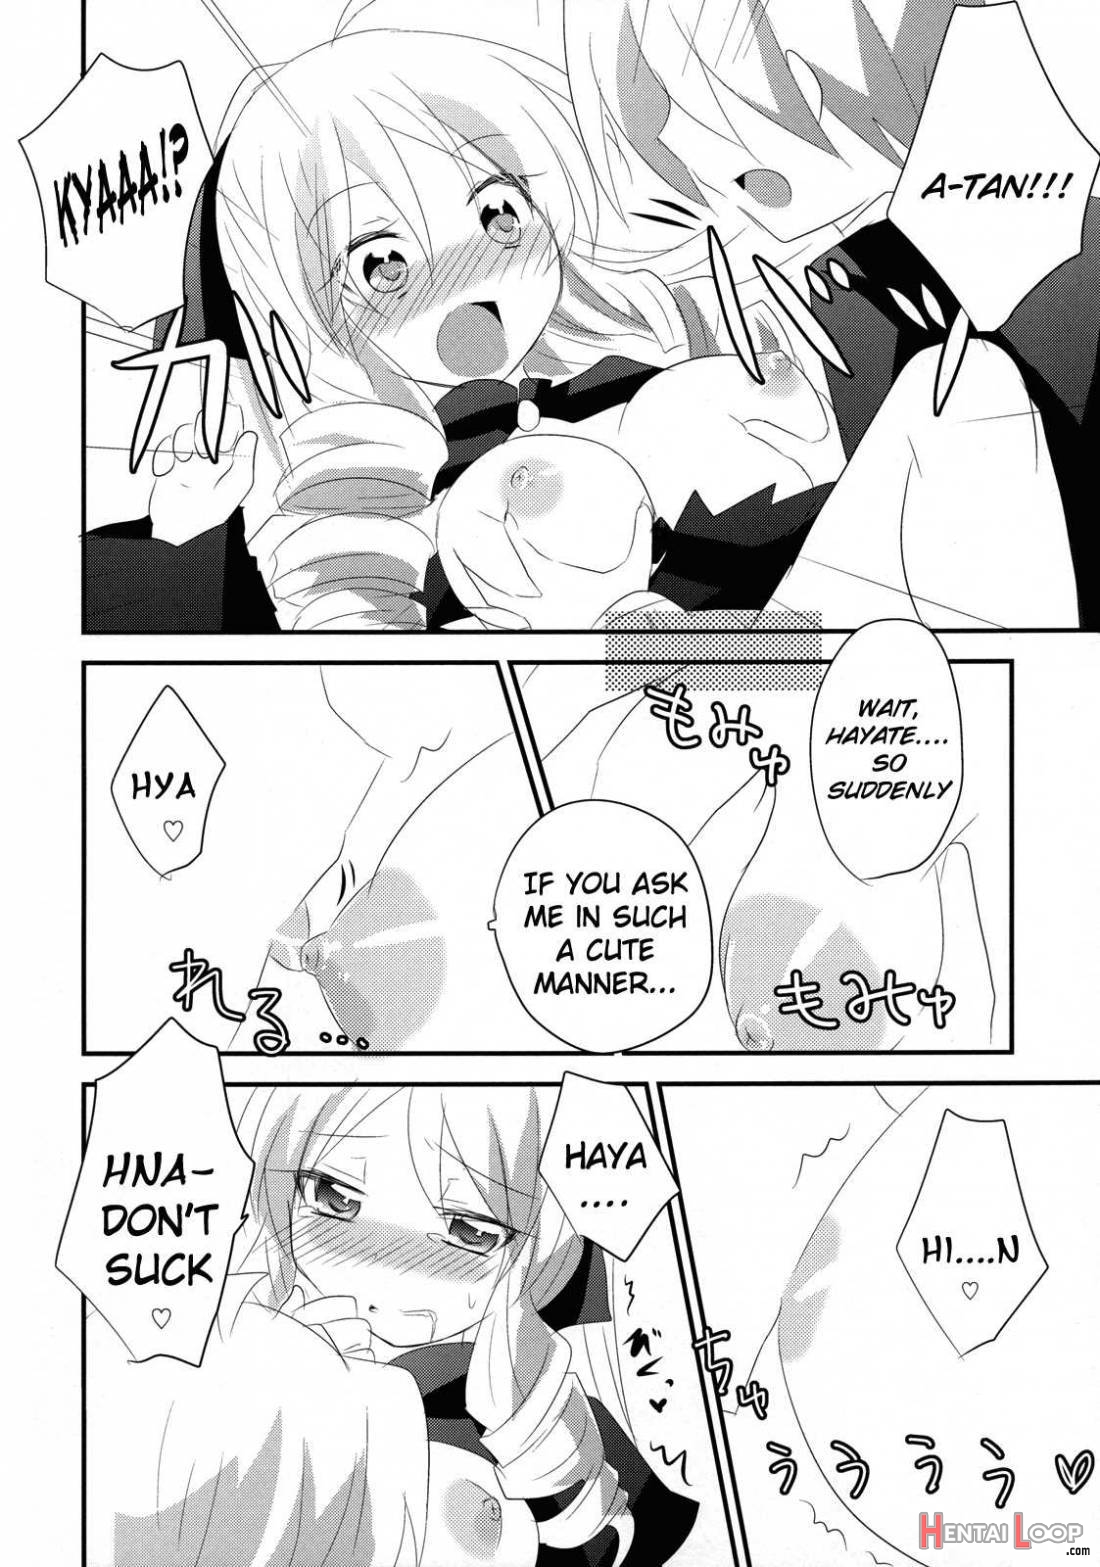 The Simple Work Of Loving A-Tan Alone page 7